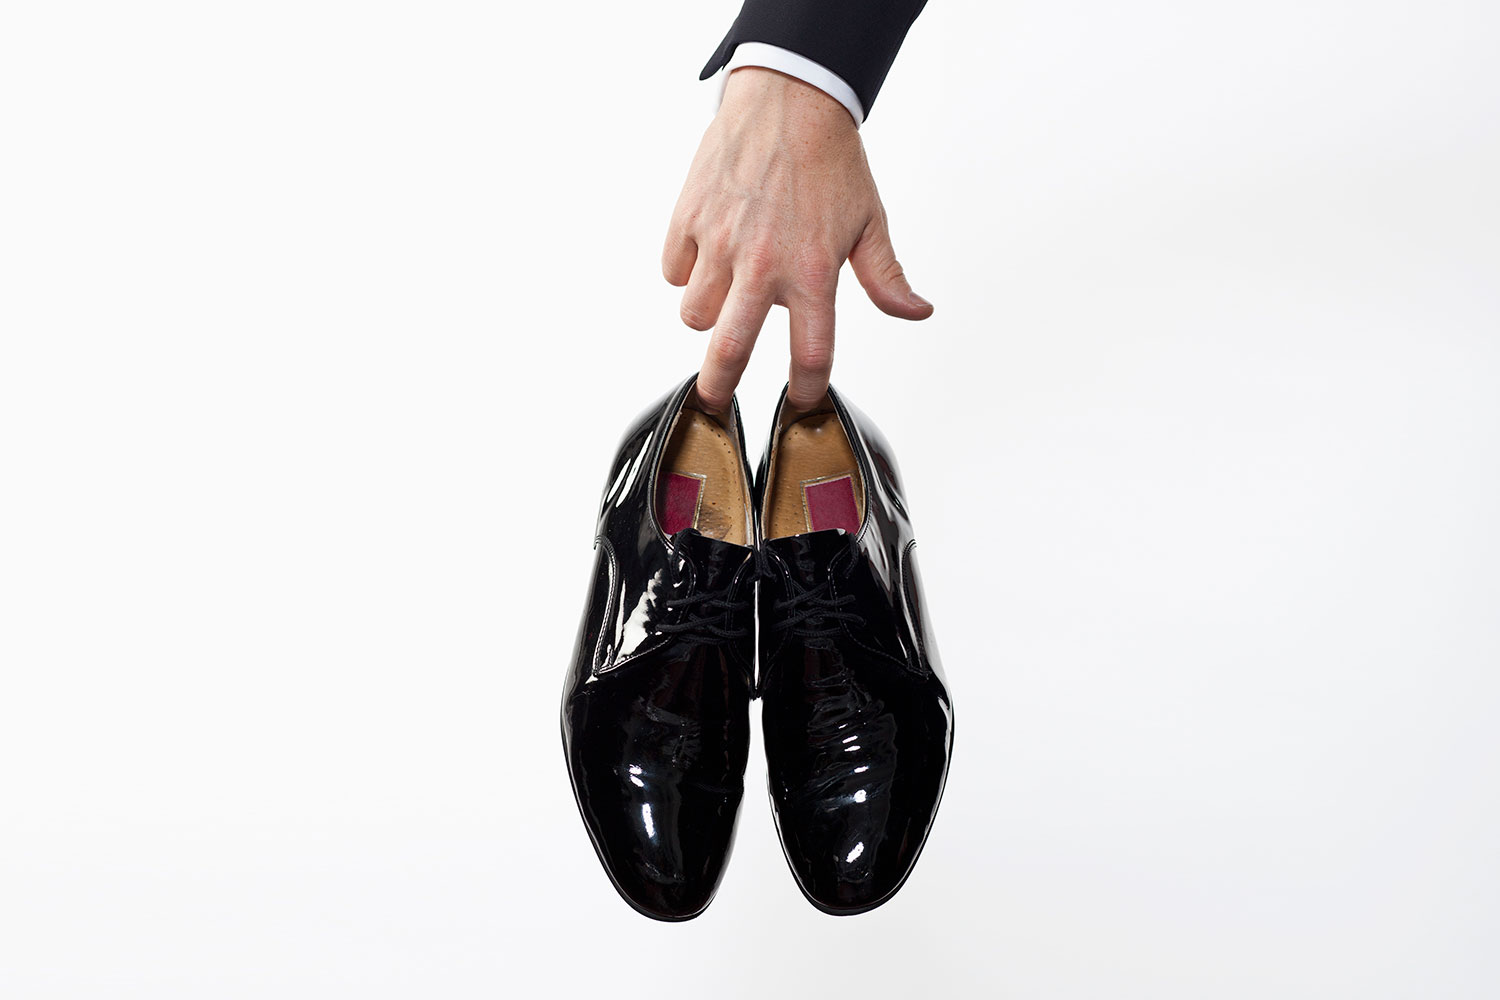 10 Most expensive Handmade shoes